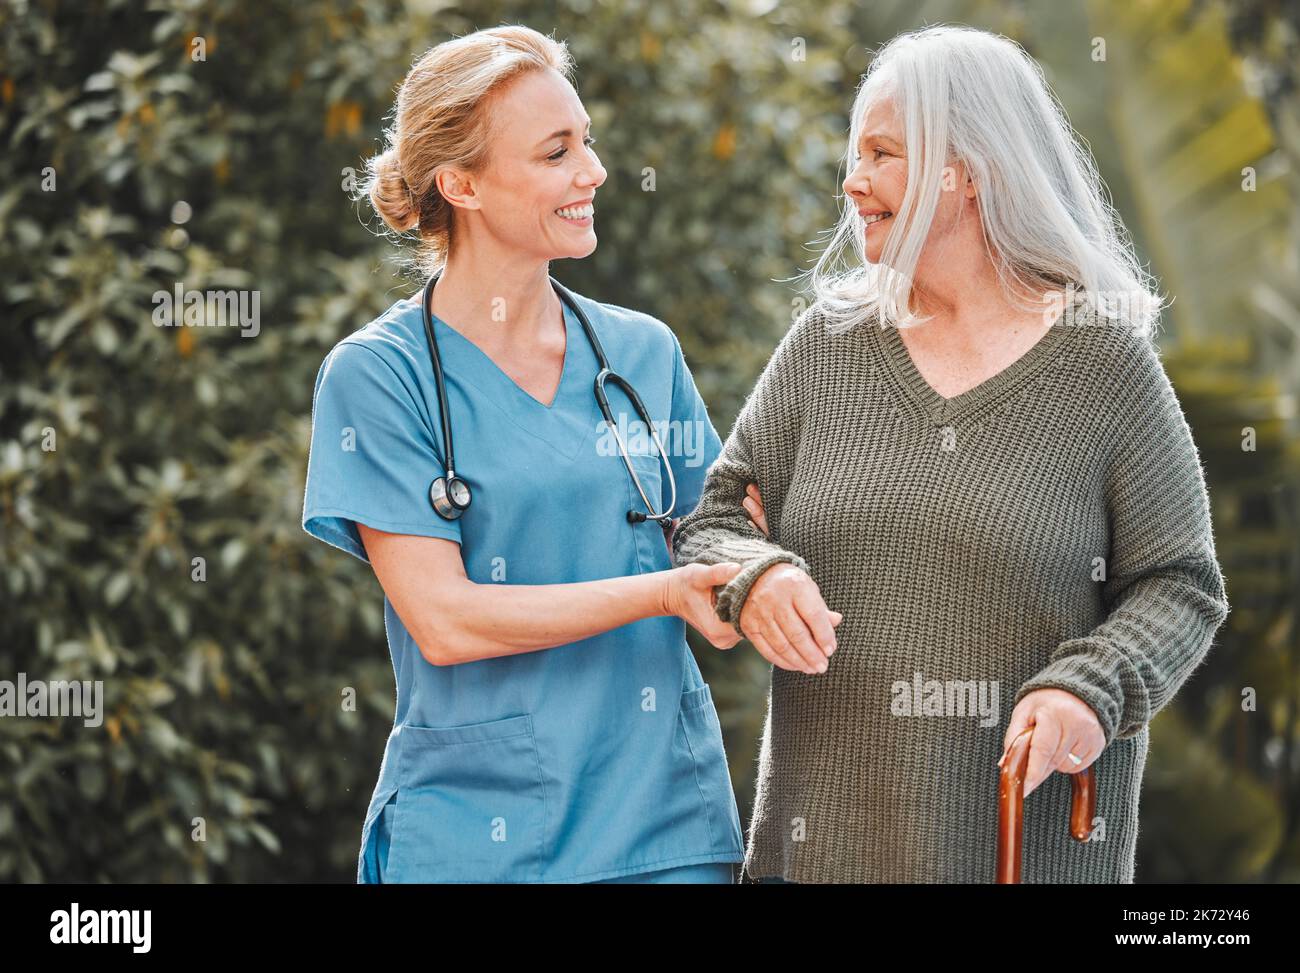 Its a wonderful day for a walk. a female nurse getting fresh air with her elderly patient. Stock Photo